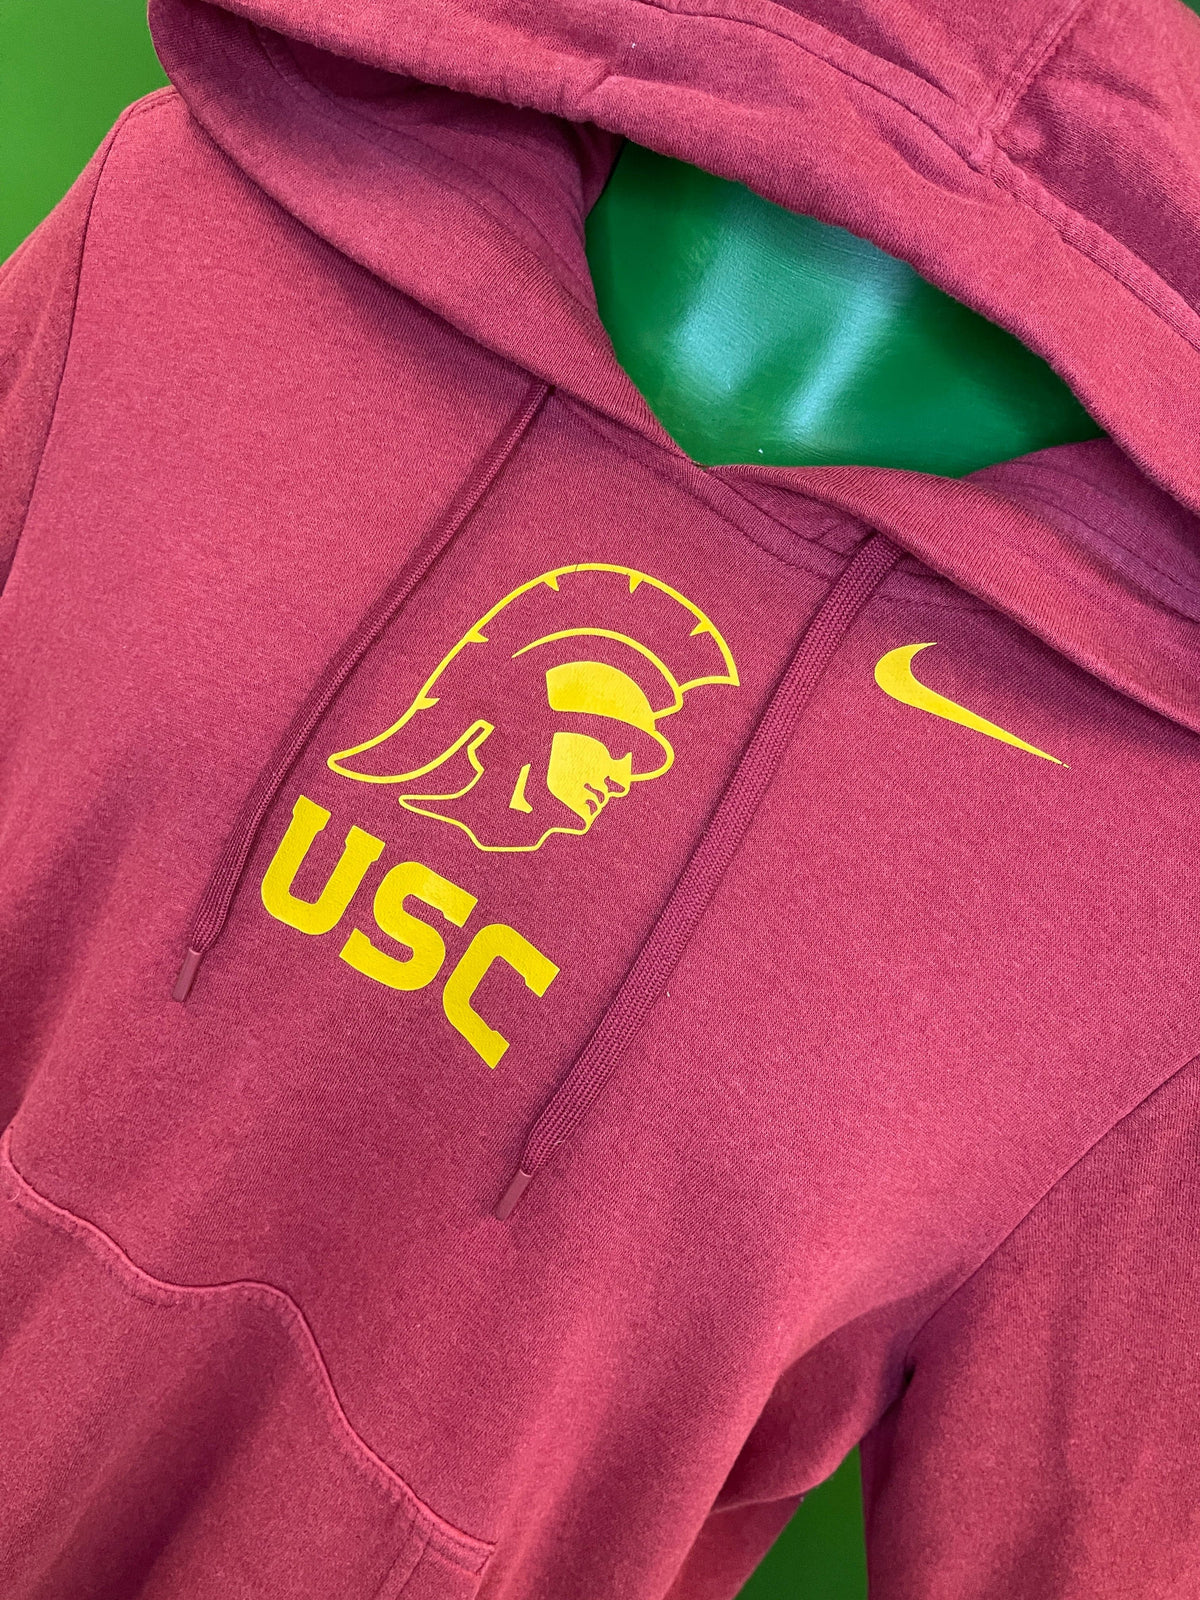 NCAA USC Trojans Red Pullover Hoodie Youth Large